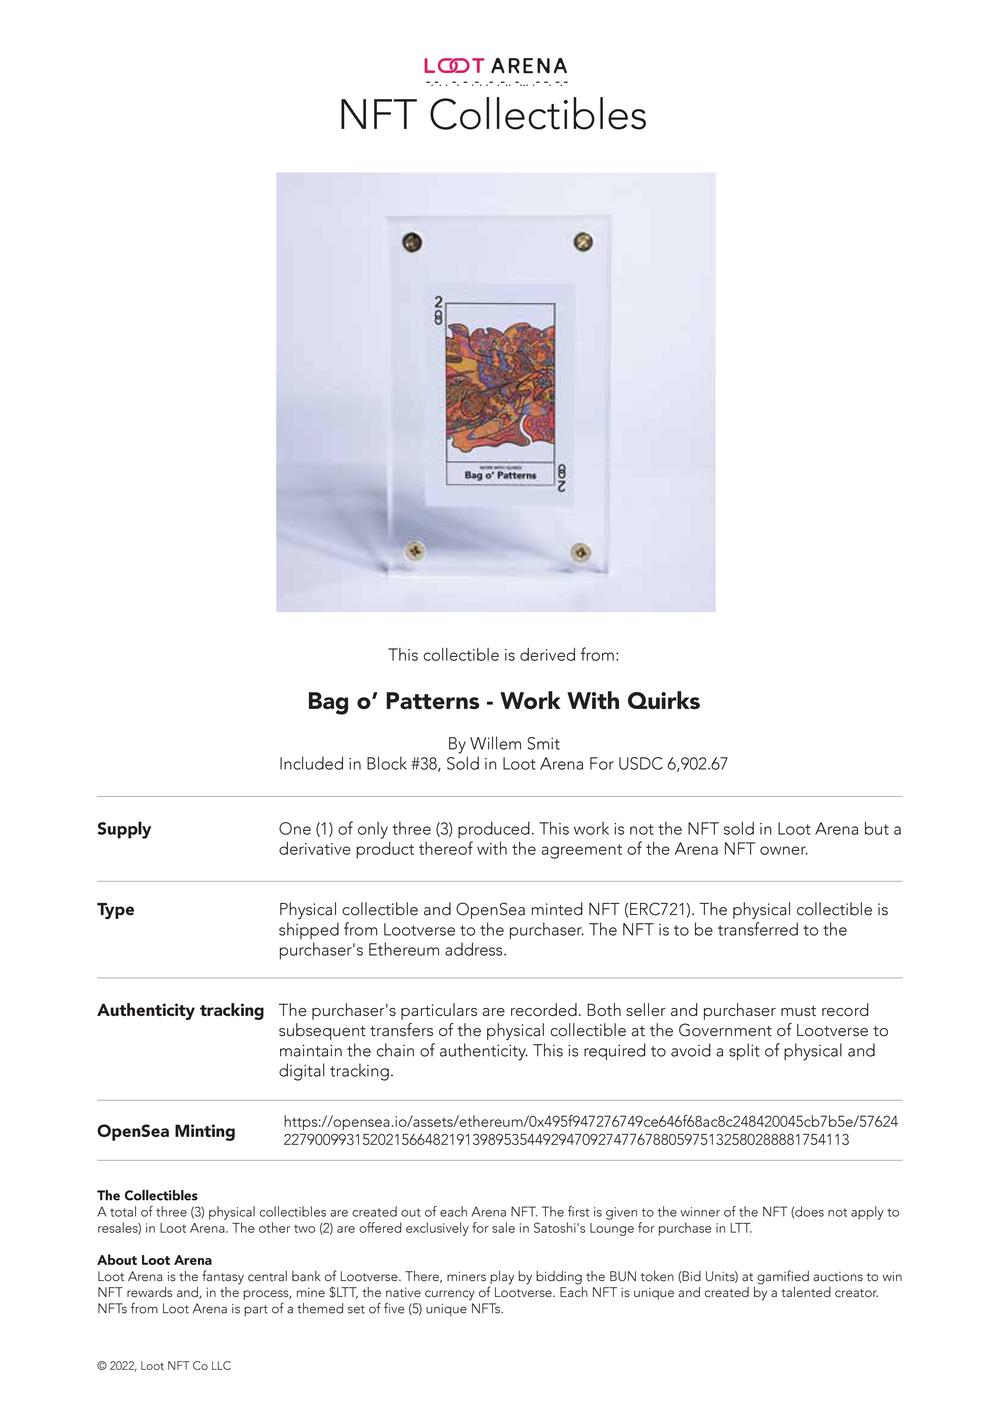 Bag o' Patterns_#1 Collectible_Contract.pdf